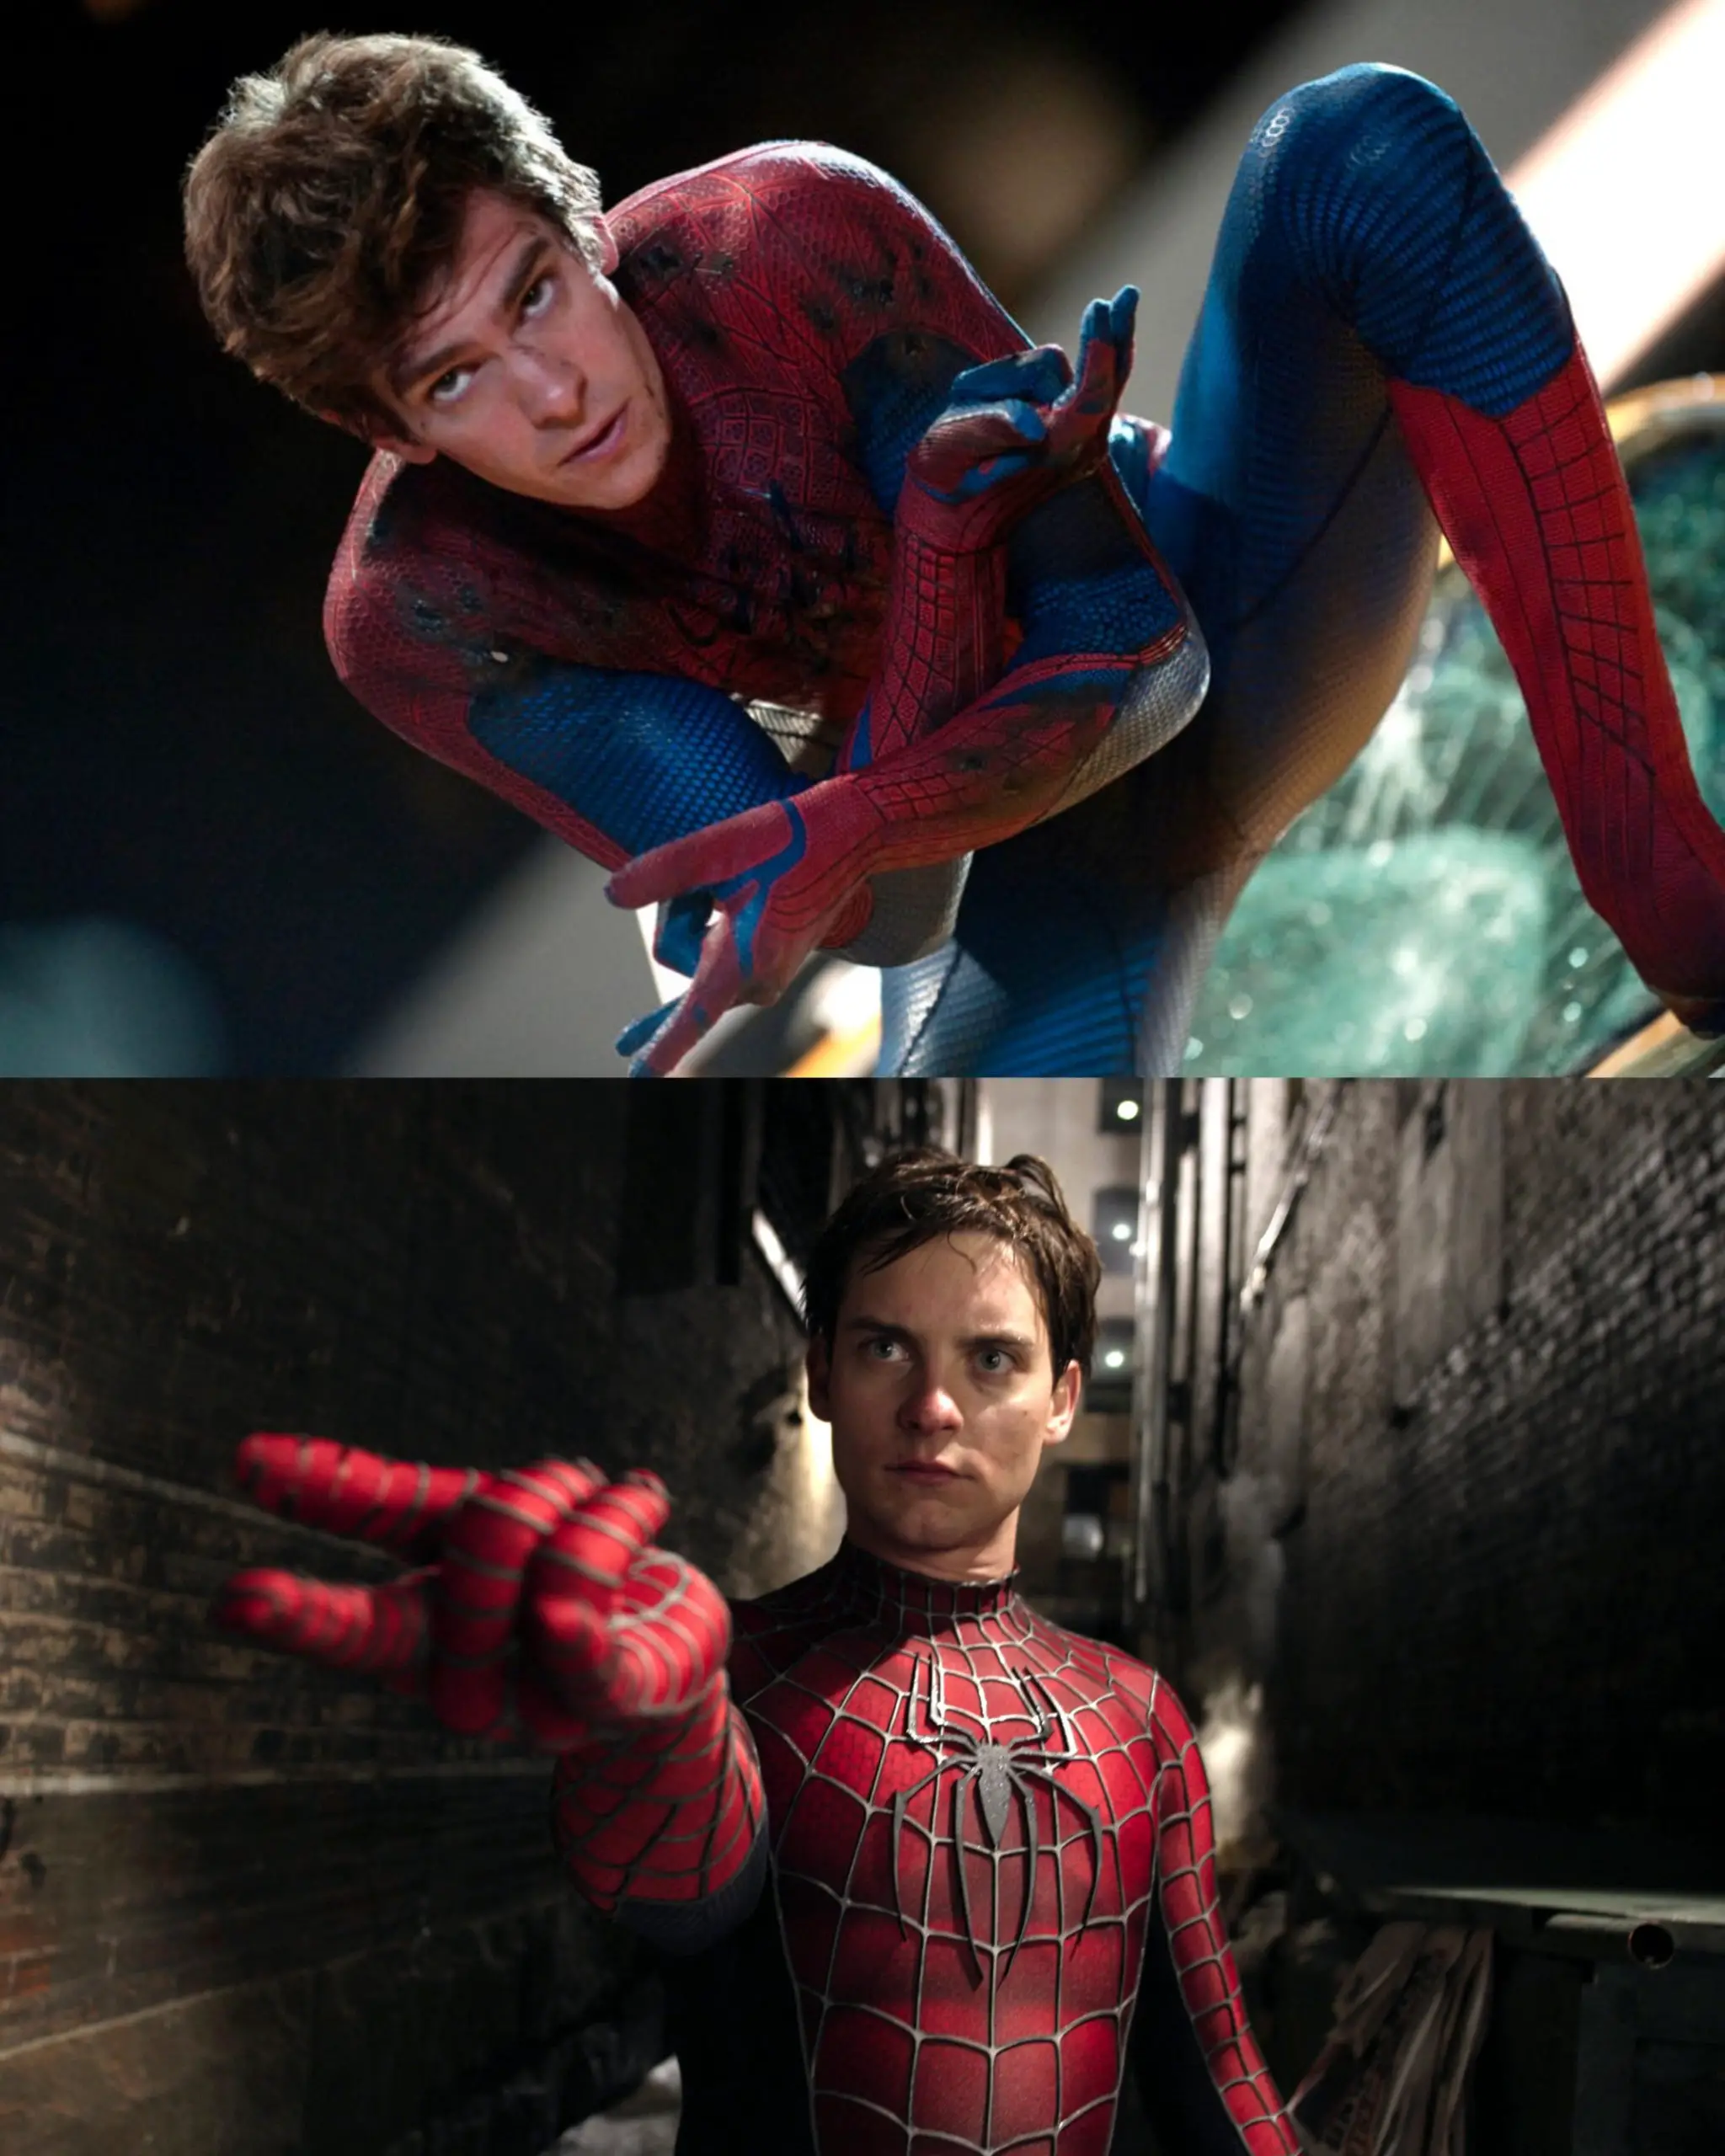 Andrew Garfield and Tobey Maguire as Spider-Man